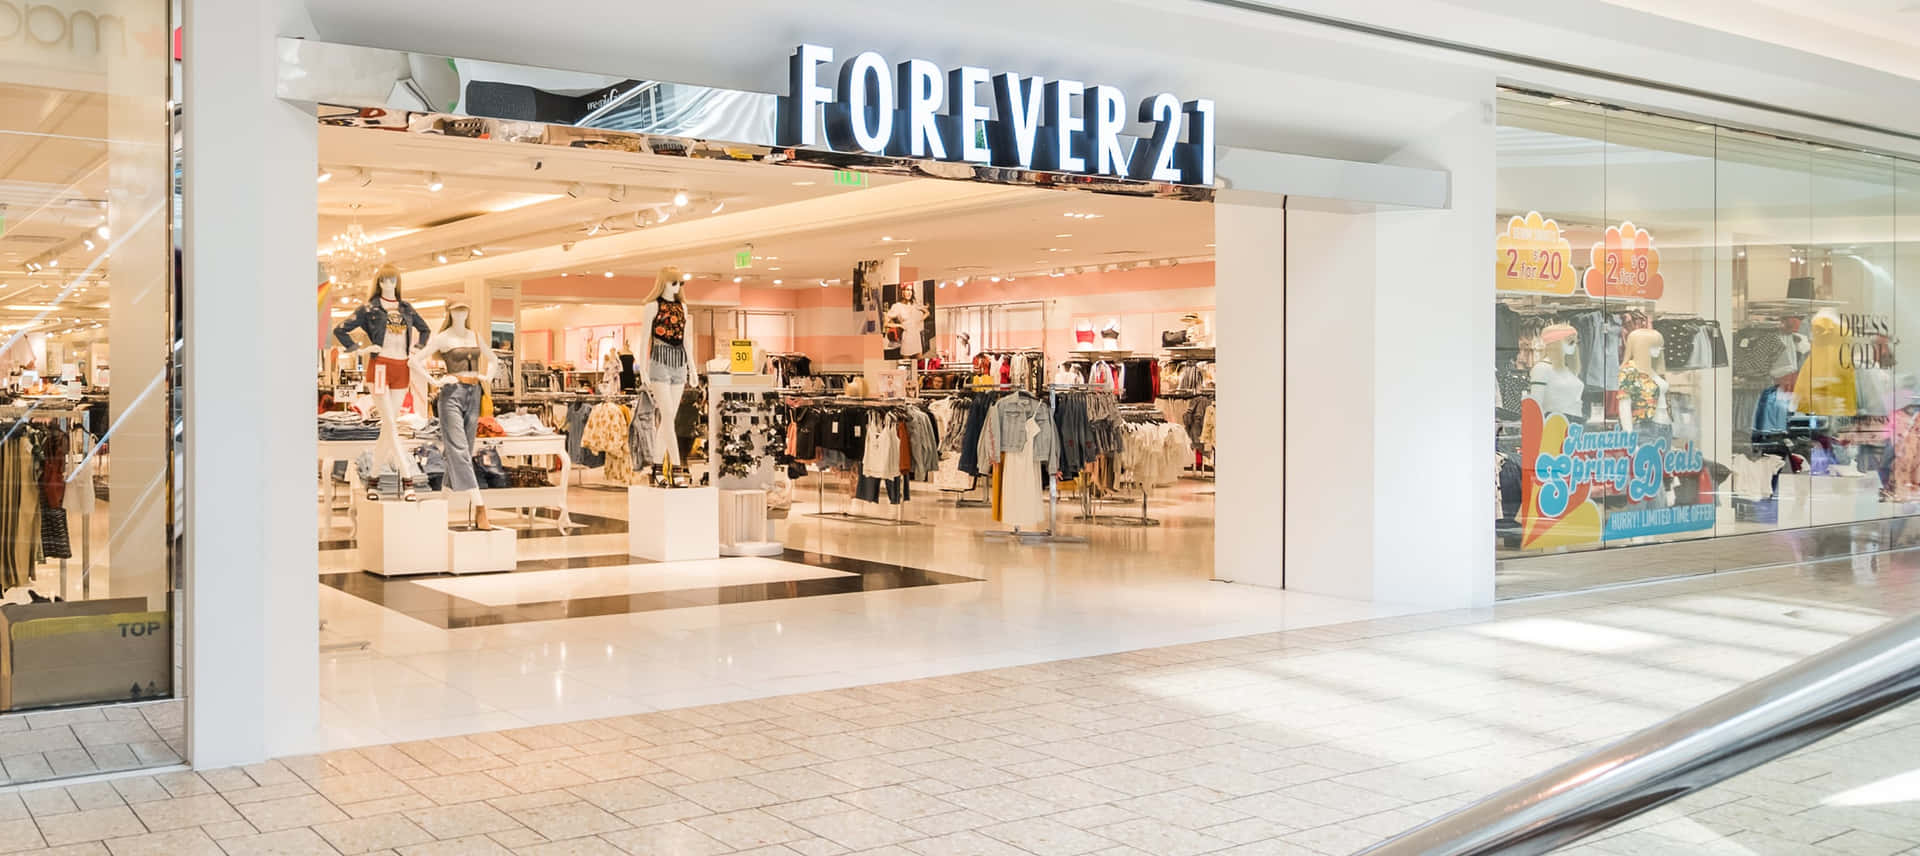 Download Shop the latest trends with Forever 21 | Wallpapers.com